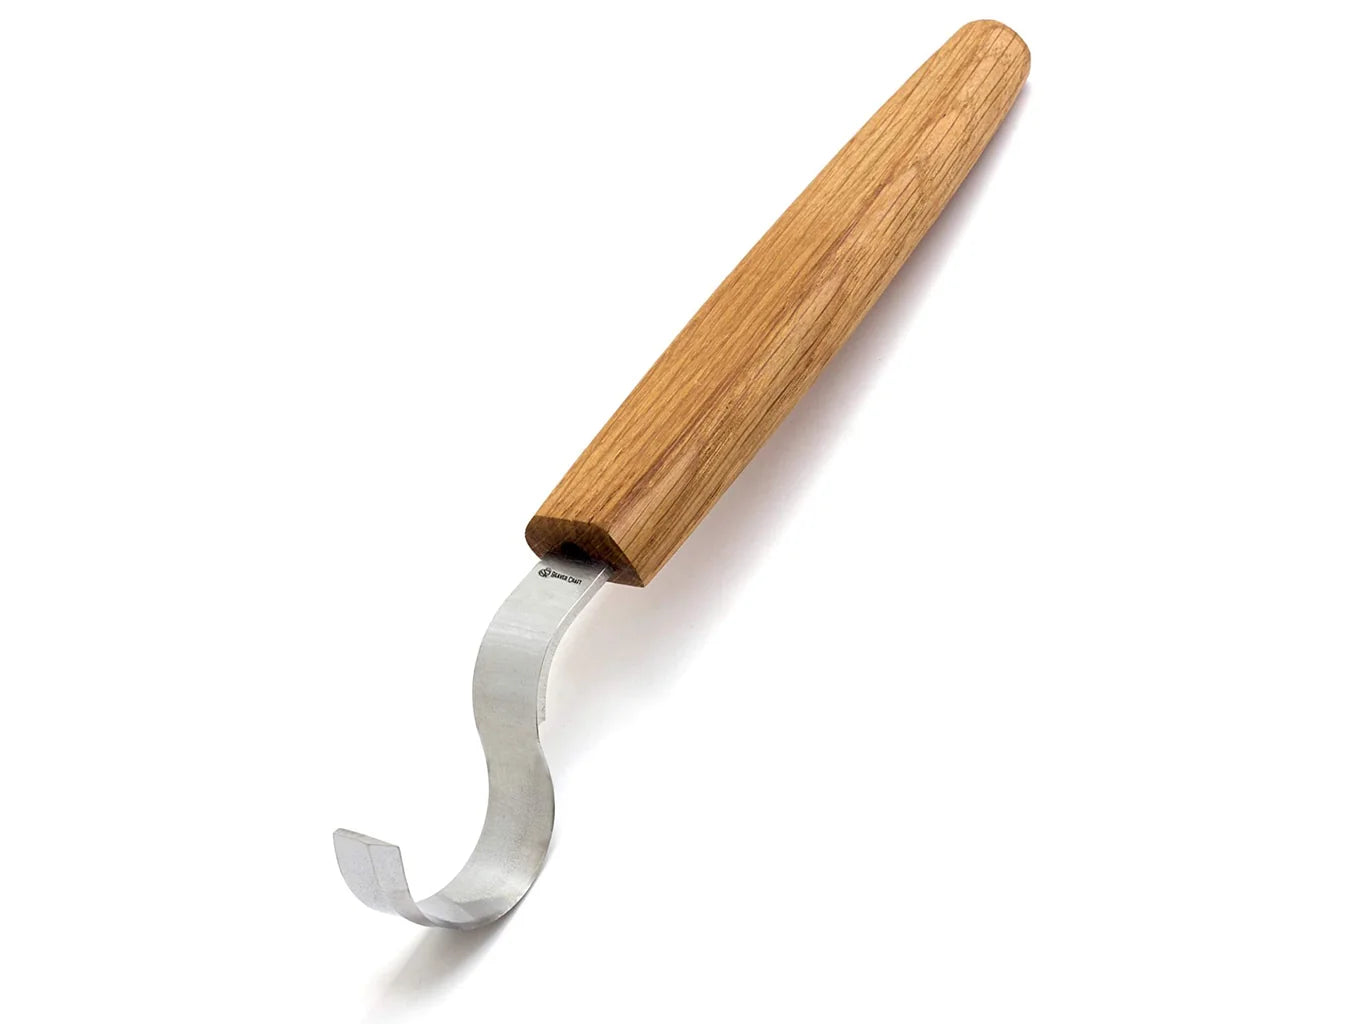 Hook knife with octagonal handle 2 - The Spoon Crank